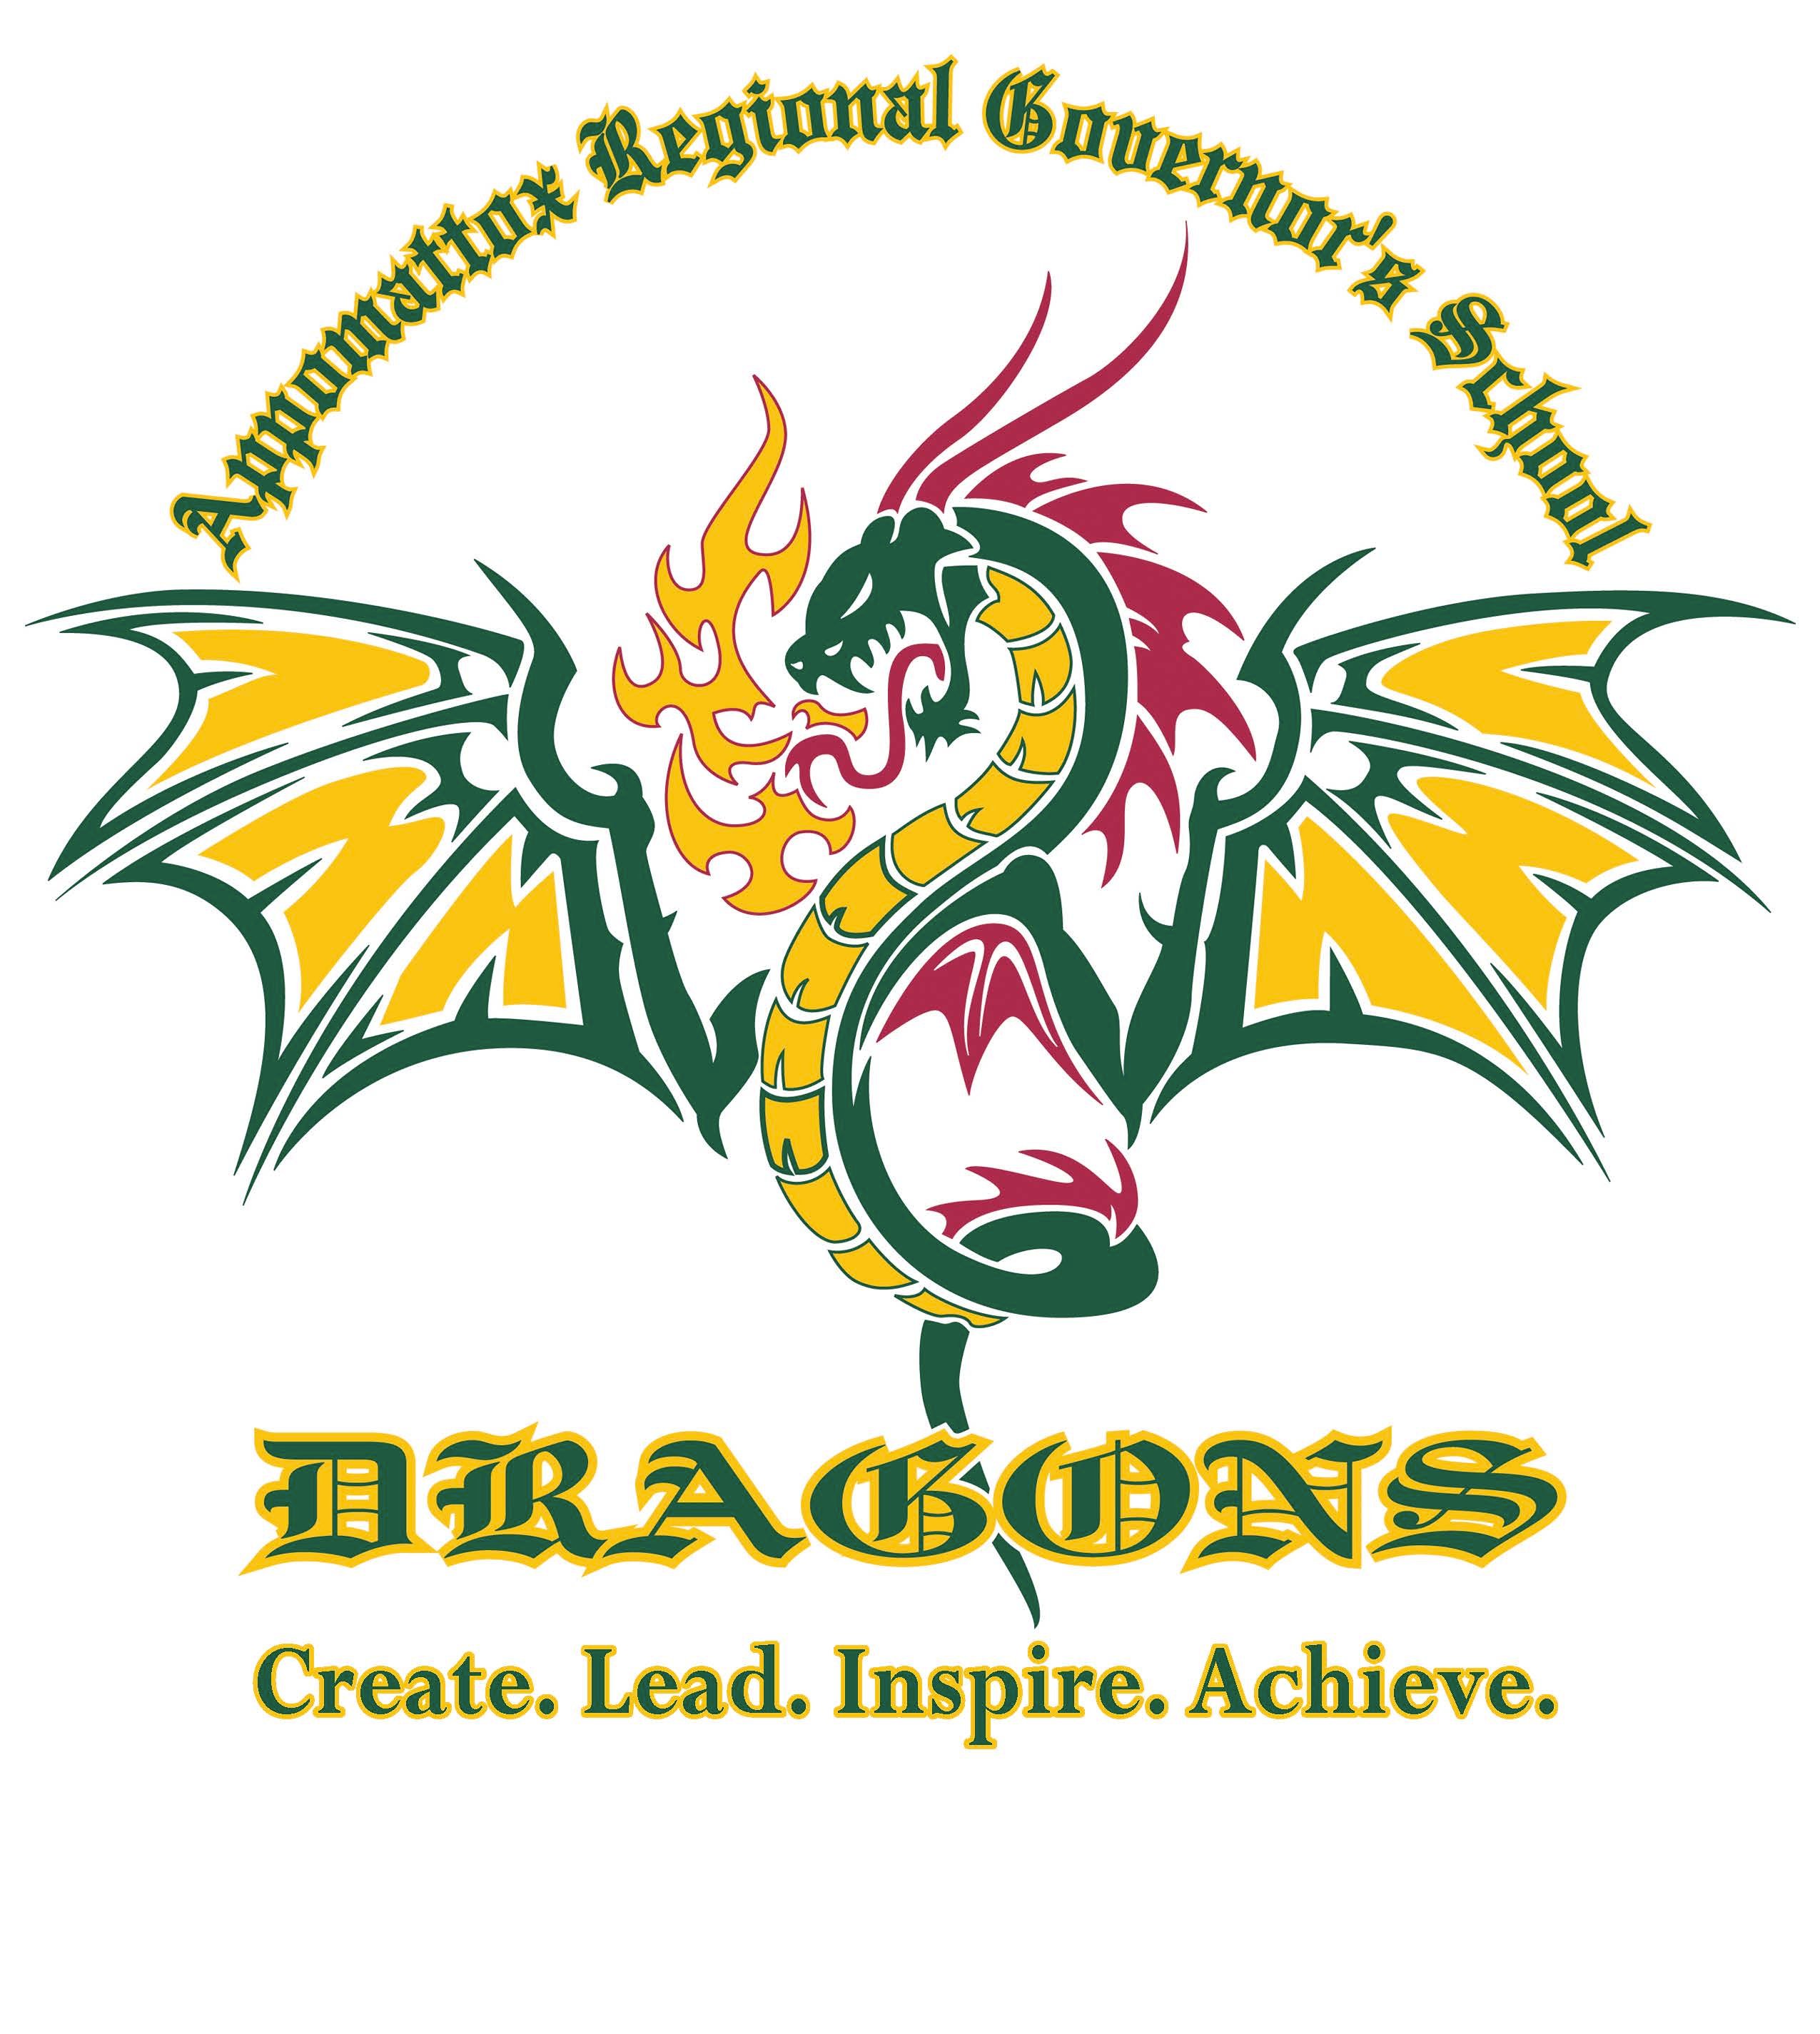 Appomattox Regional Governor's School is the leading Arts and Technology High School in Virginia. Our students come here to Create, Lead, Inspire and Achieve.